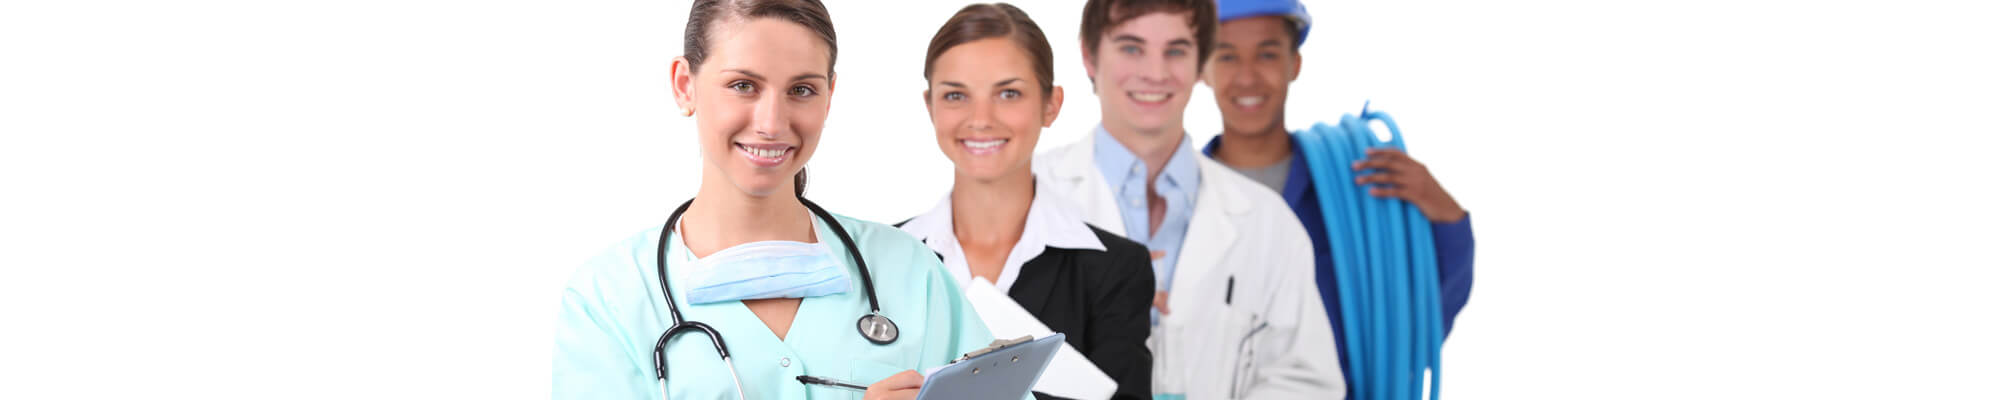 examples of nursing resumes and healthcare resumes